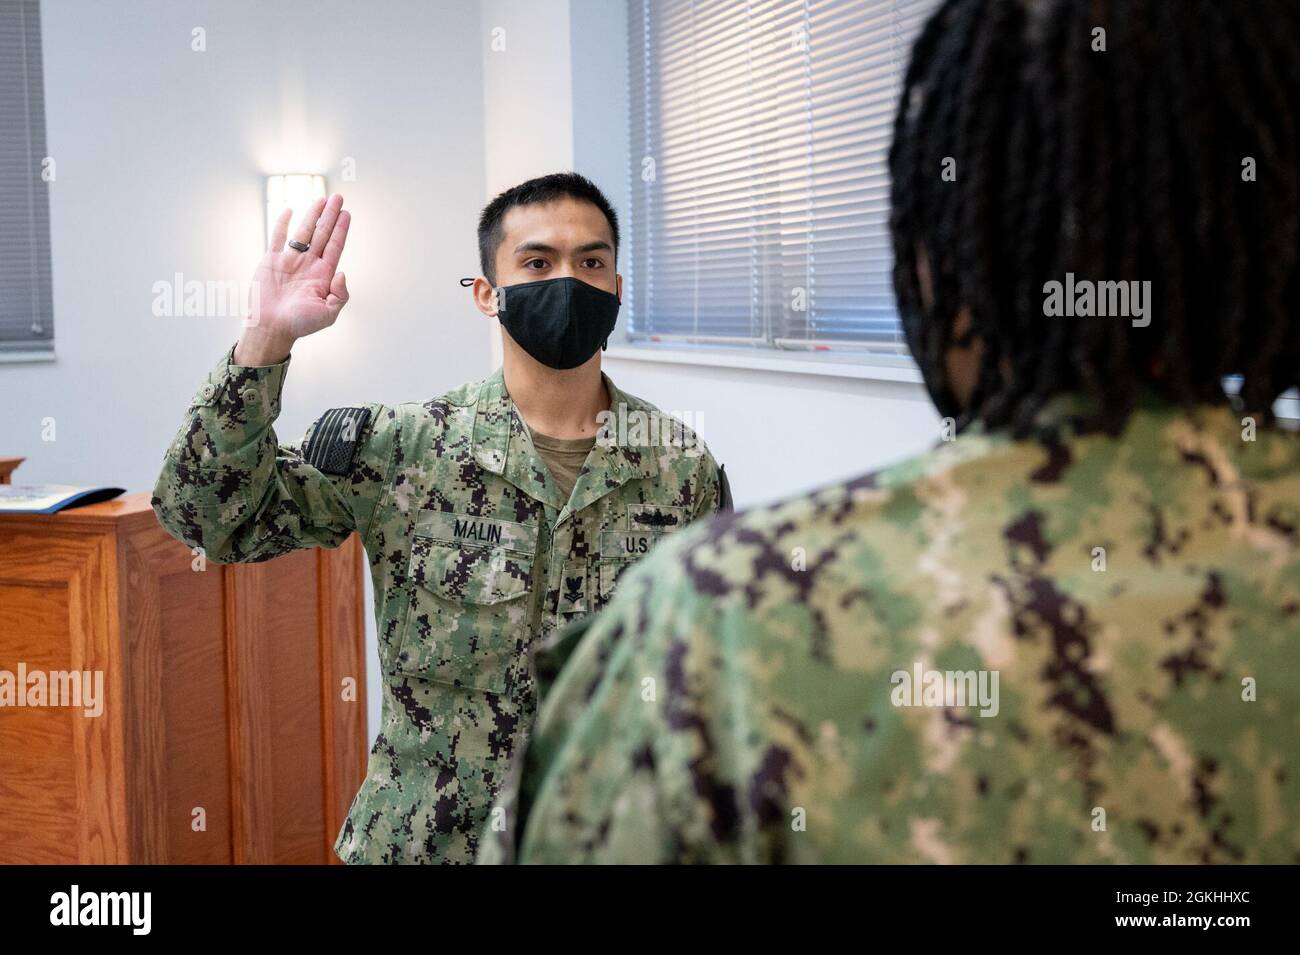 WASHINGTON, DC (April 23, 2021) – Religious Program Specialist 2nd Class Arvin Malin recites the oath of enlistment during a ceremony onboard Washington Navy Yard. Stock Photo